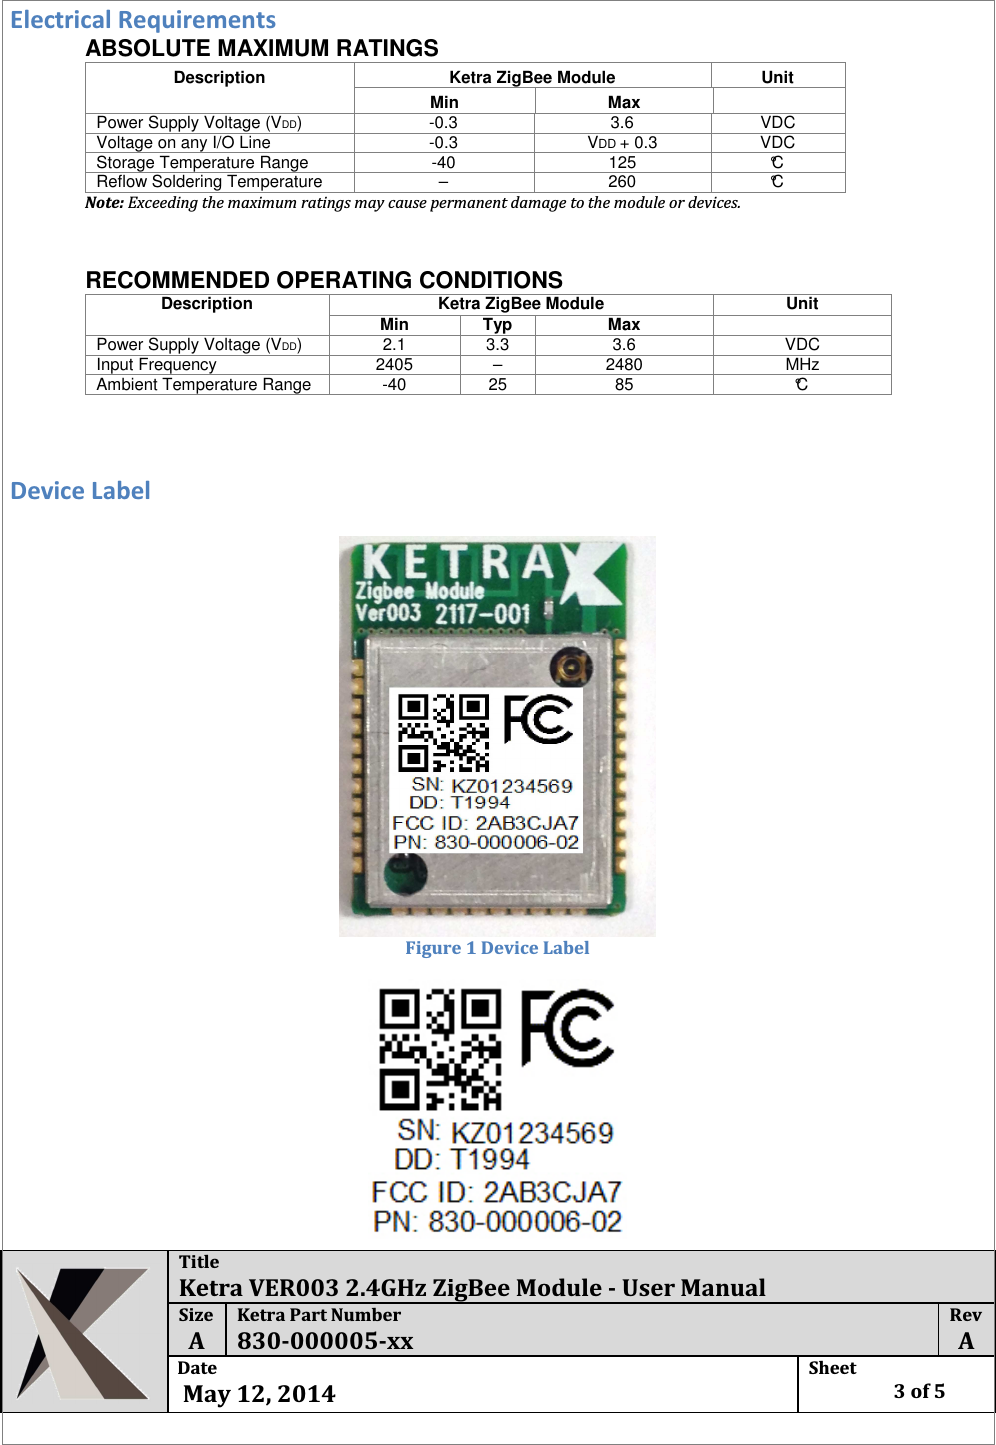  Title Ketra VER003 2.4GHz ZigBee Module - User Manual Size  A Ketra Part Number 830-000005-xx Rev  A Date   May 12, 2014 Sheet    3 of 5  Electrical Requirements ABSOLUTE MAXIMUM RATINGS Description  Ketra ZigBee Module  Unit  Min  Max    Power Supply Voltage (VDD)   -0.3   3.6   VDC  Voltage on any I/O Line   -0.3   VDD + 0.3   VDC  Storage Temperature Range   -40   125   °C  Reflow Soldering Temperature   –   260   °C  Note: Exceeding the maximum ratings may cause permanent damage to the module or devices.       RECOMMENDED OPERATING CONDITIONS  Description  Ketra ZigBee Module Unit  Min  Typ  Max   Power Supply Voltage (VDD)   2.1   3.3   3.6   VDC  Input Frequency   2405   –   2480   MHz  Ambient Temperature Range   -40   25   85   °C    Device Label   Figure 1 Device Label  